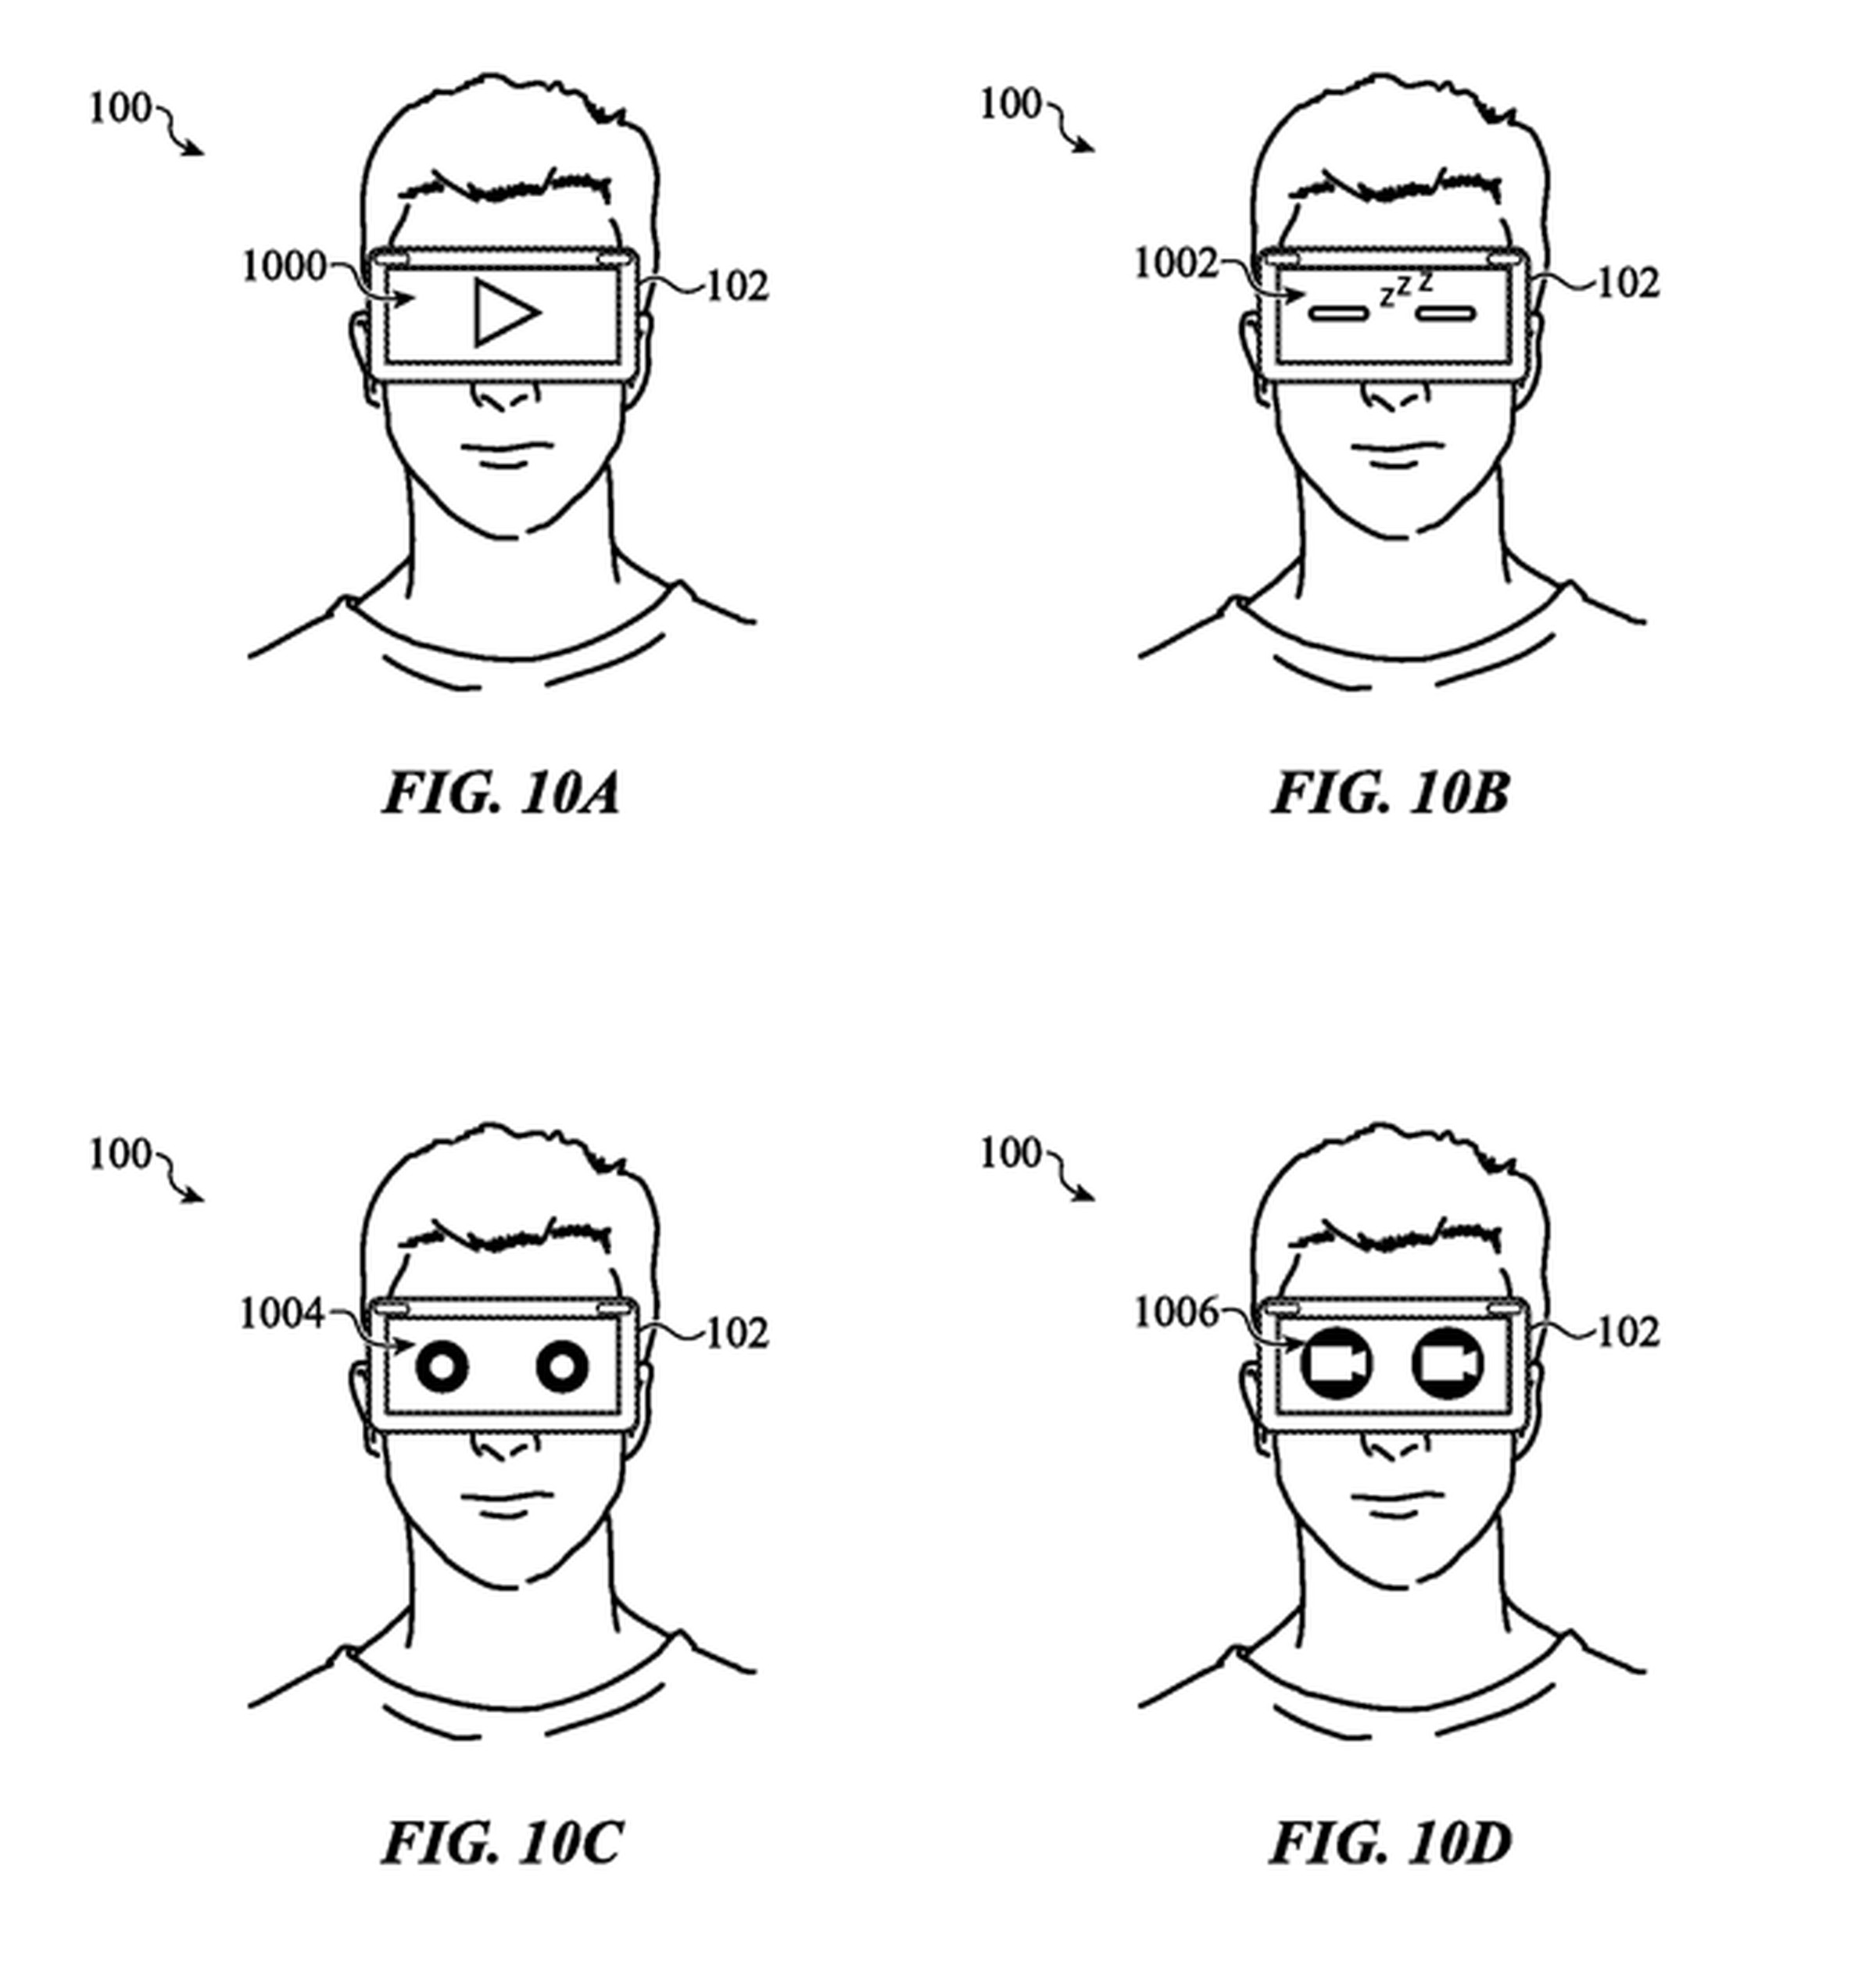 A screenshot of an Apple patent for things that could be shown on the external screen of a head-mounted device.